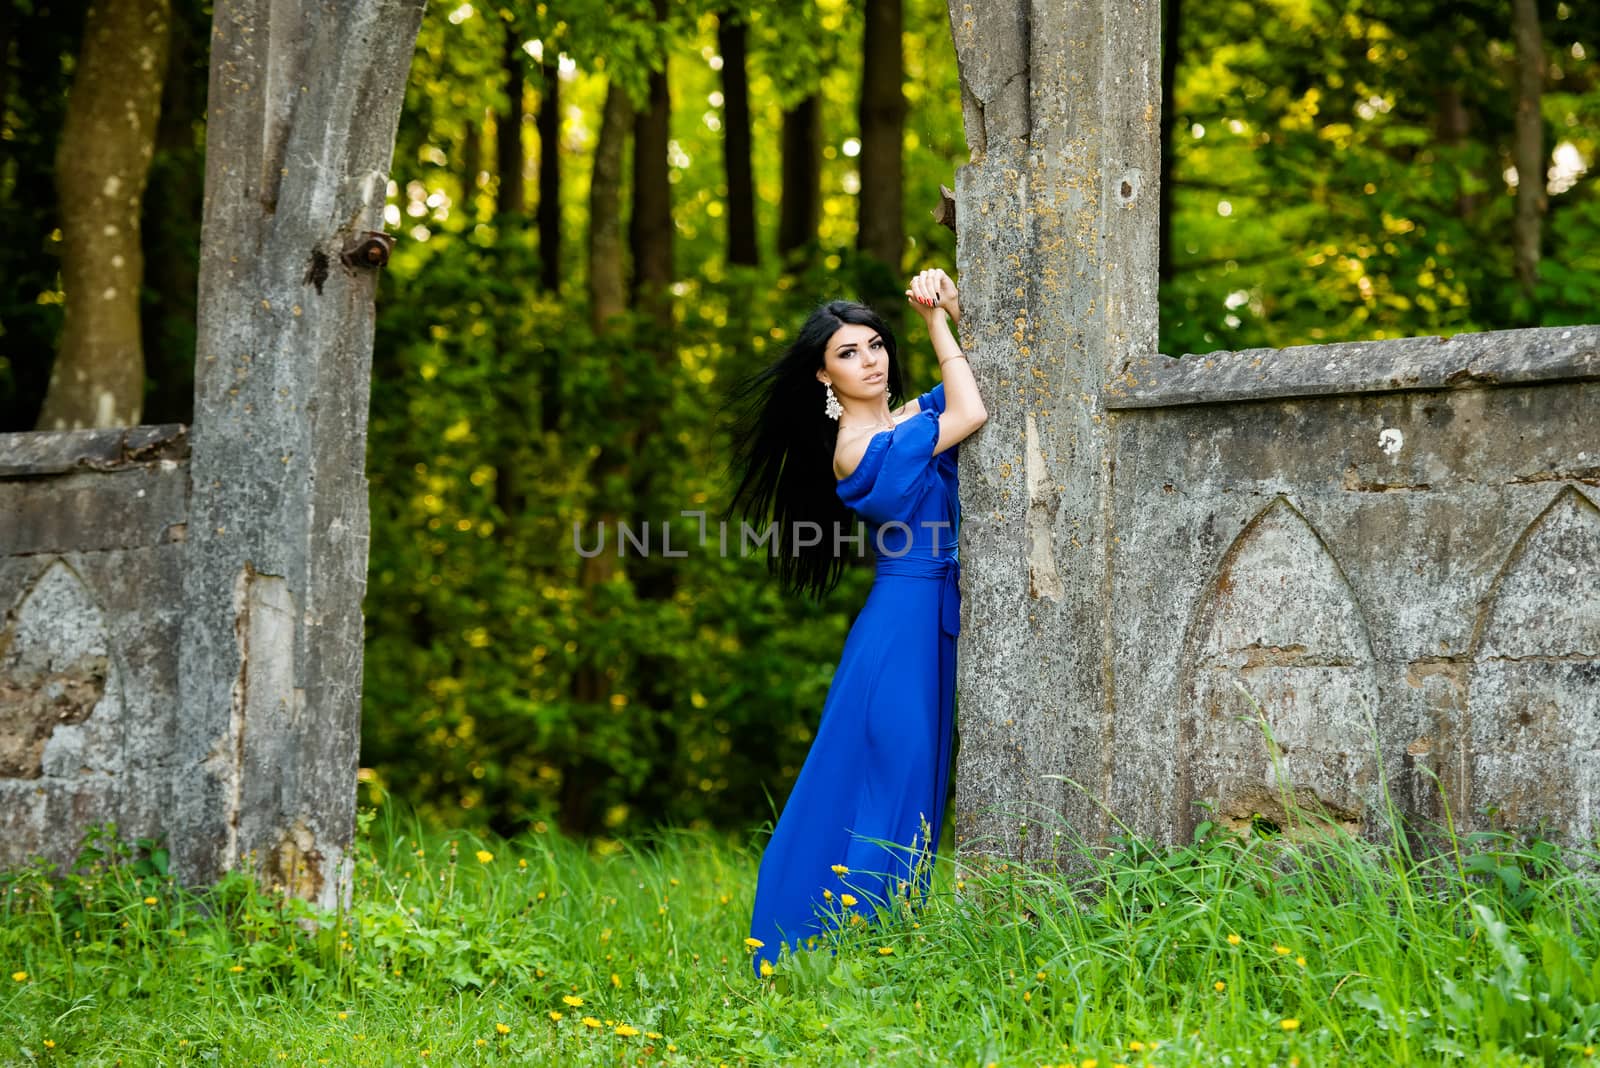 Portrait Of Sensual Fashion Woman In Blue Dress Outdoor by Draw05